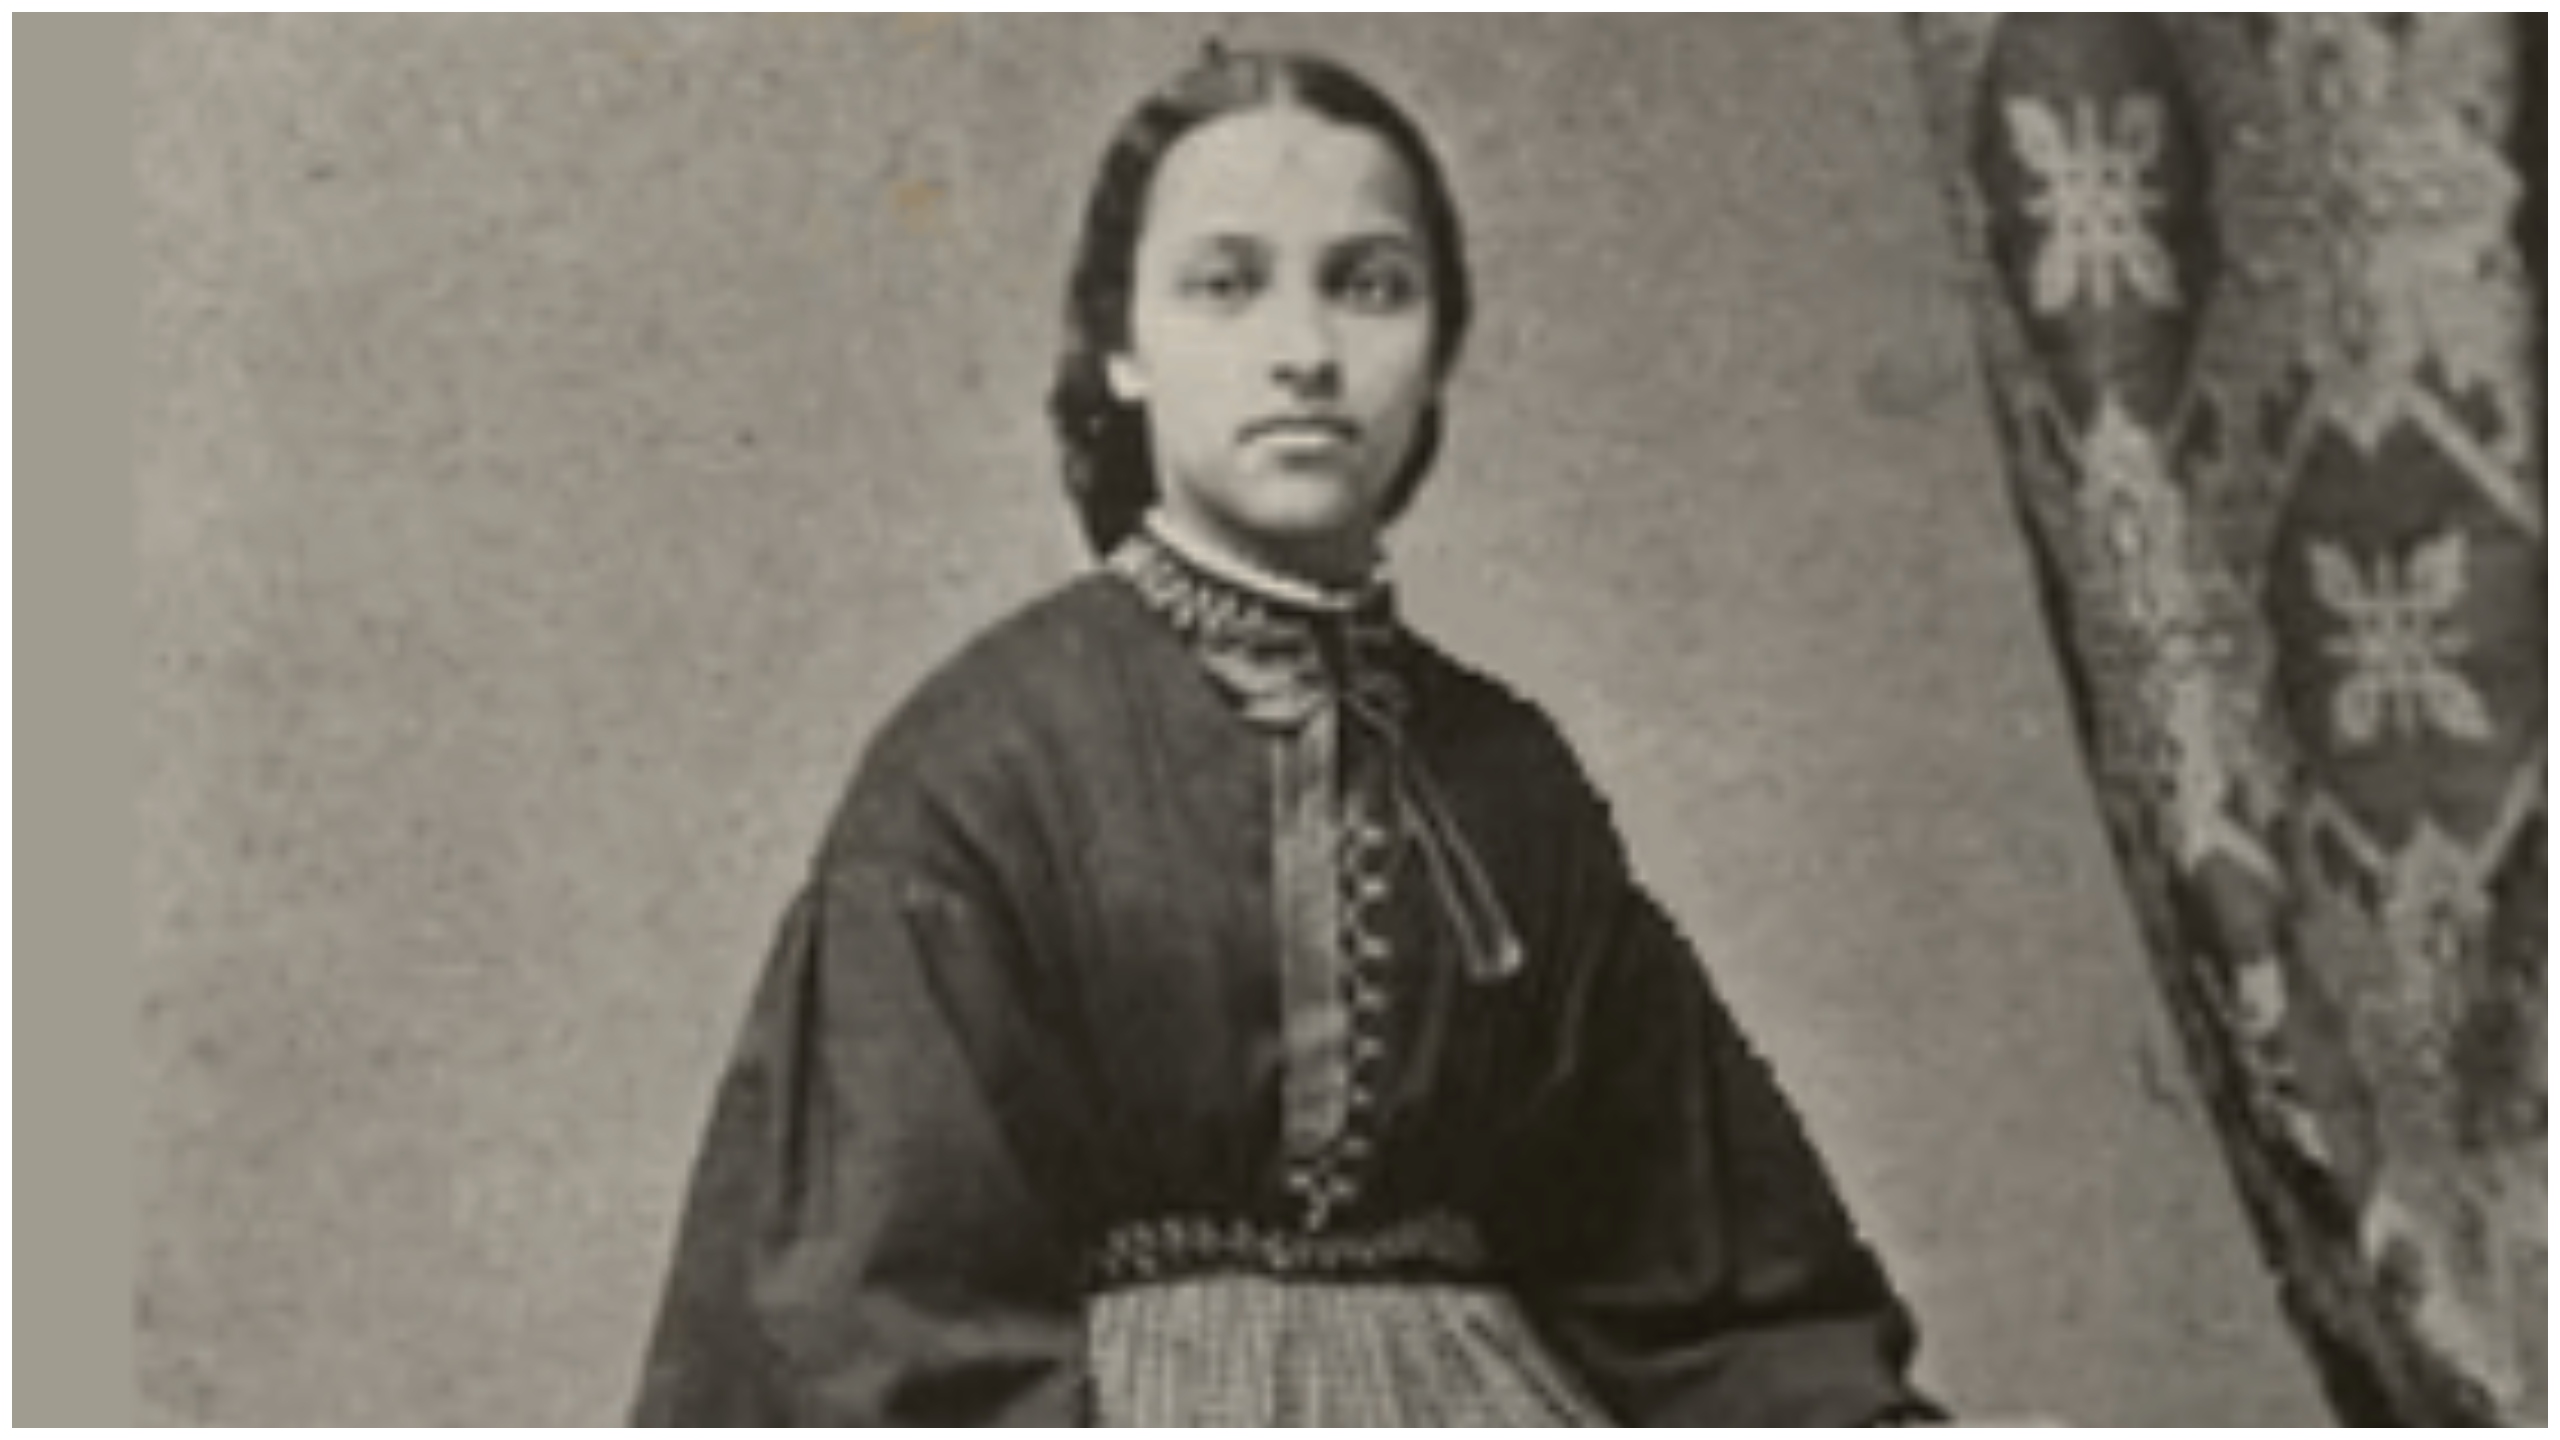 Meet The Legendary Mary Jane Patterson The First Black Woman To Receive A Bachelor’s Degree